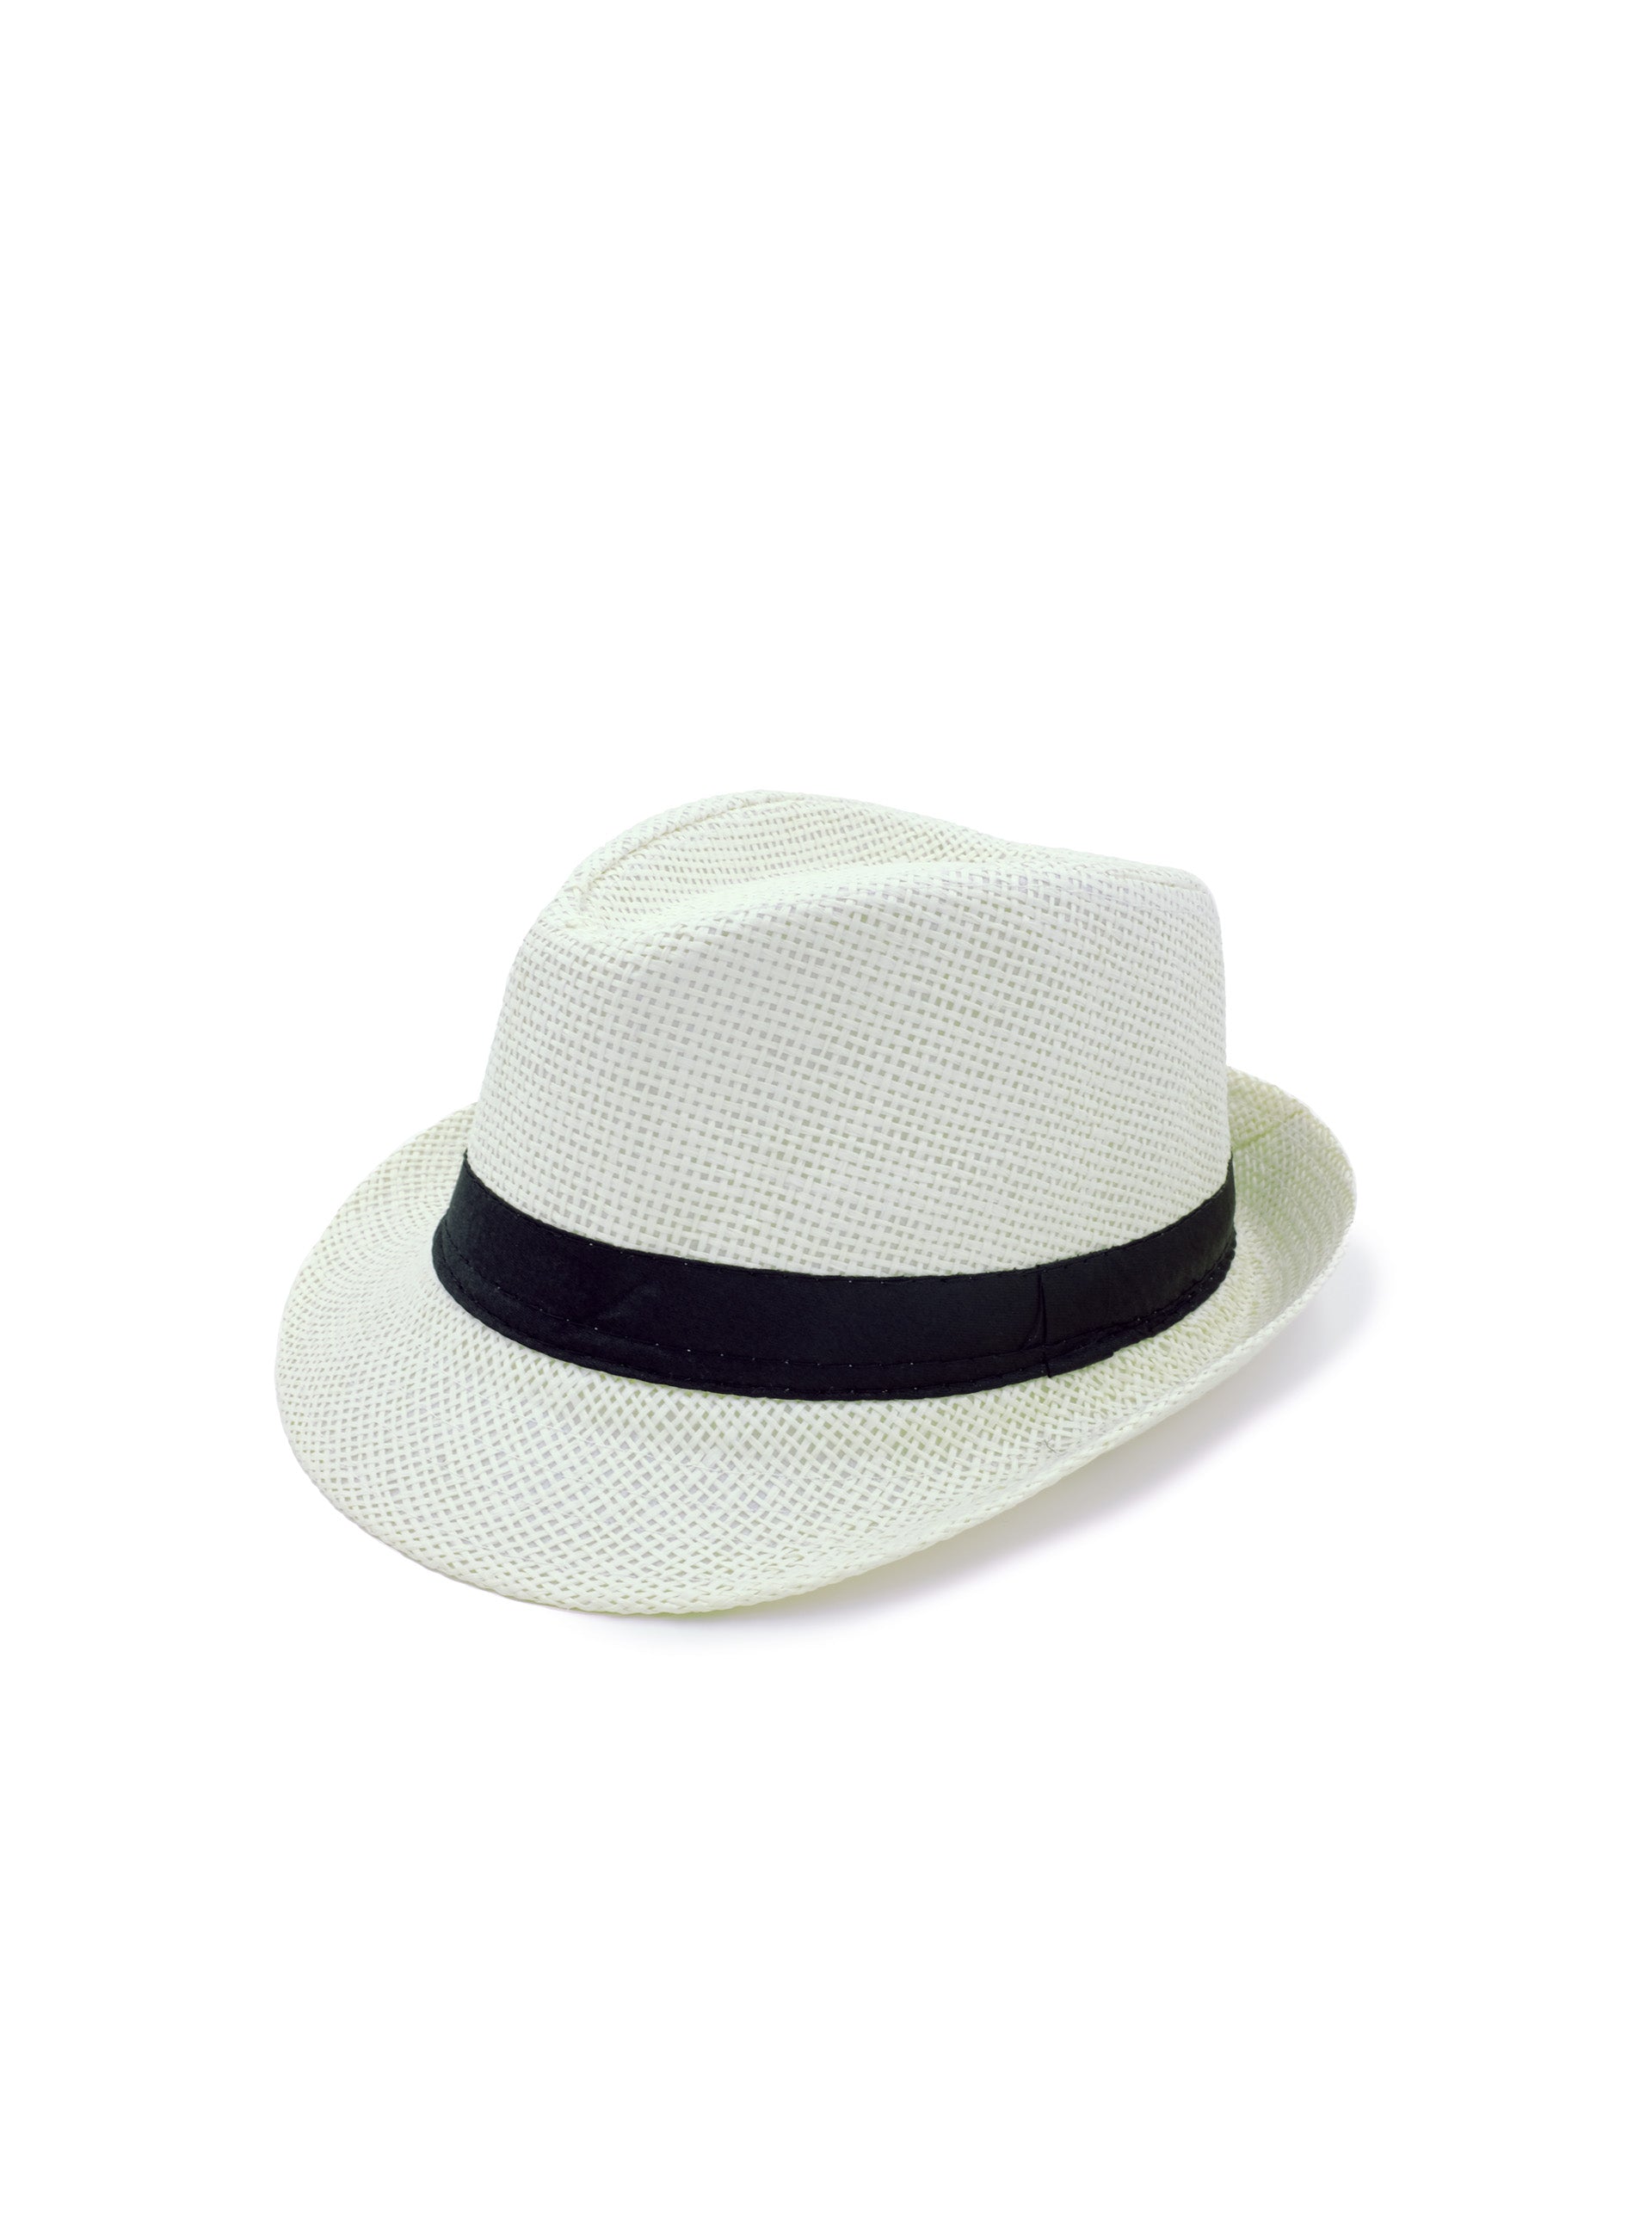 off white fedora hat with black band